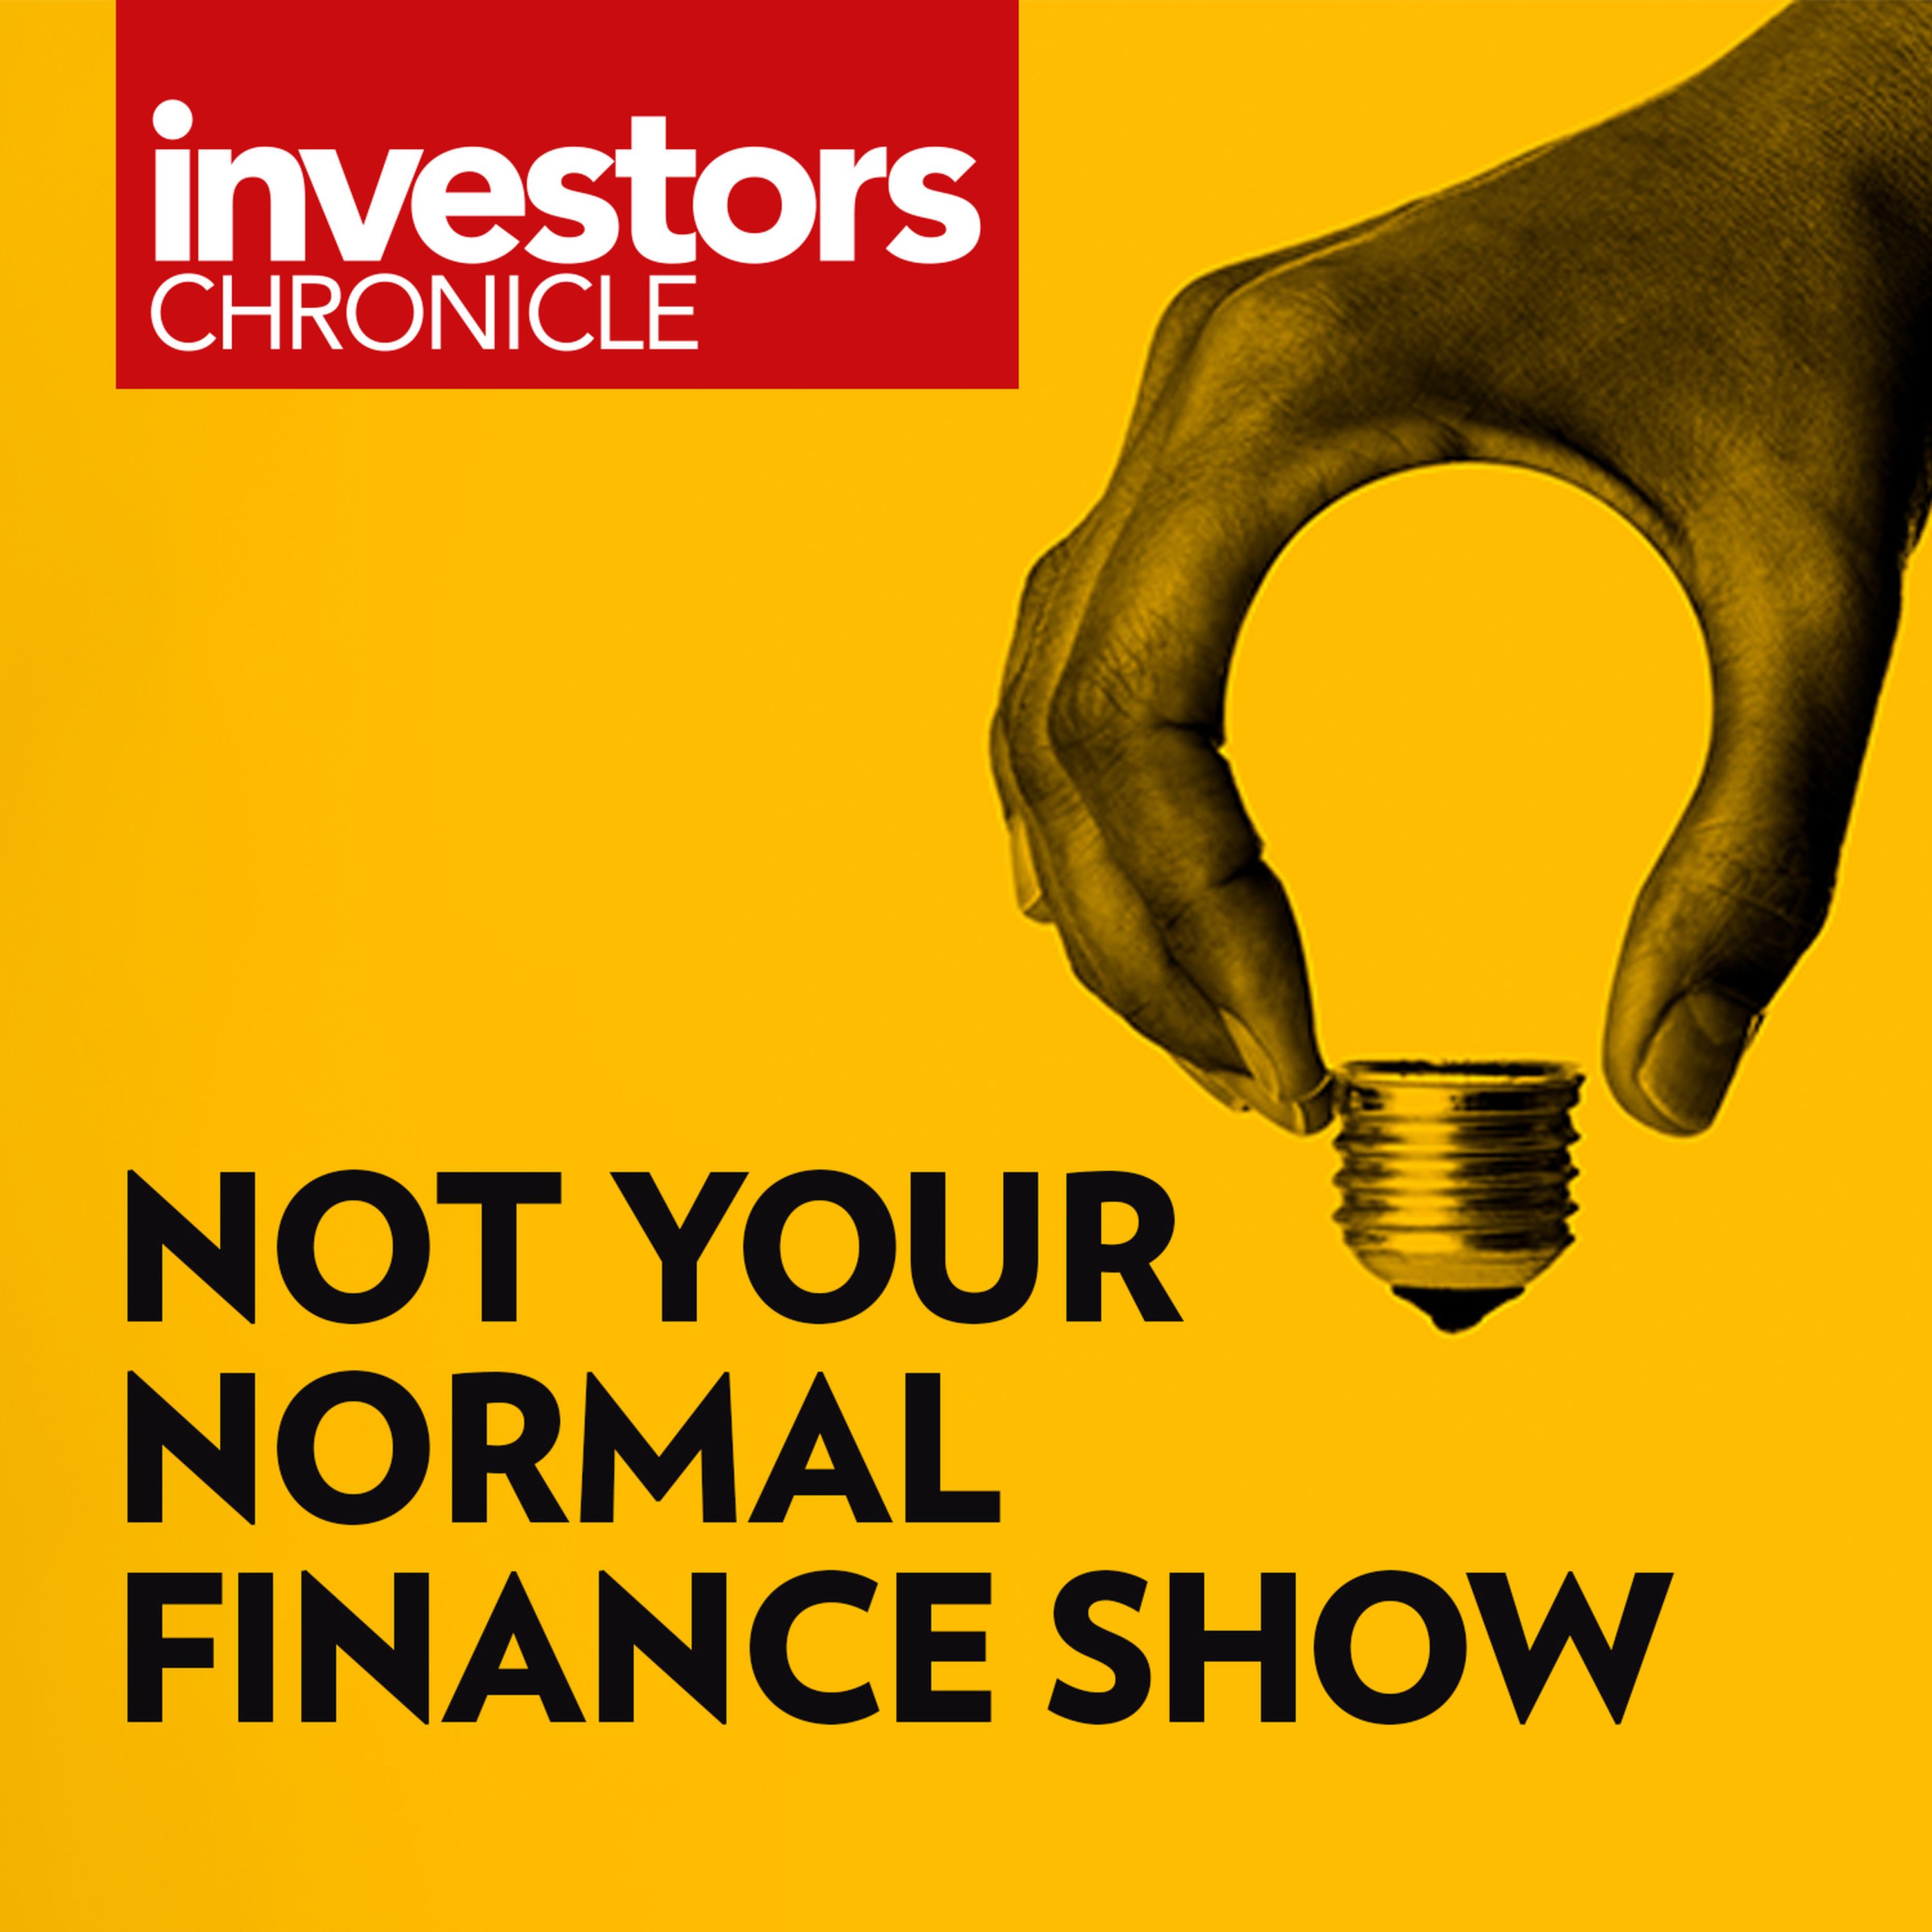 Not your normal finance show: DIY-ing to get back to normality